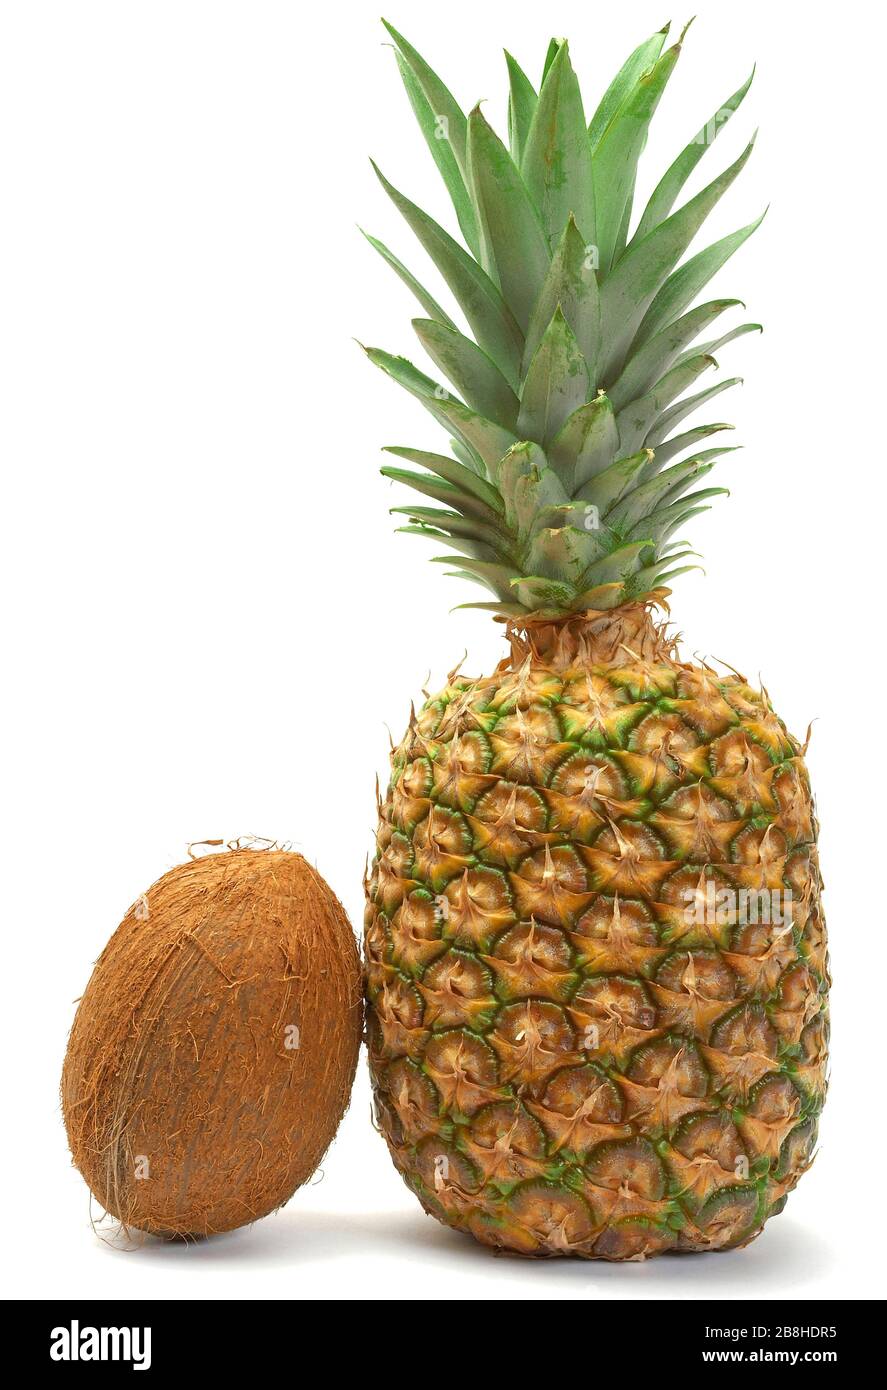 Coco and pineapple isolated on the white background. Stock Photo